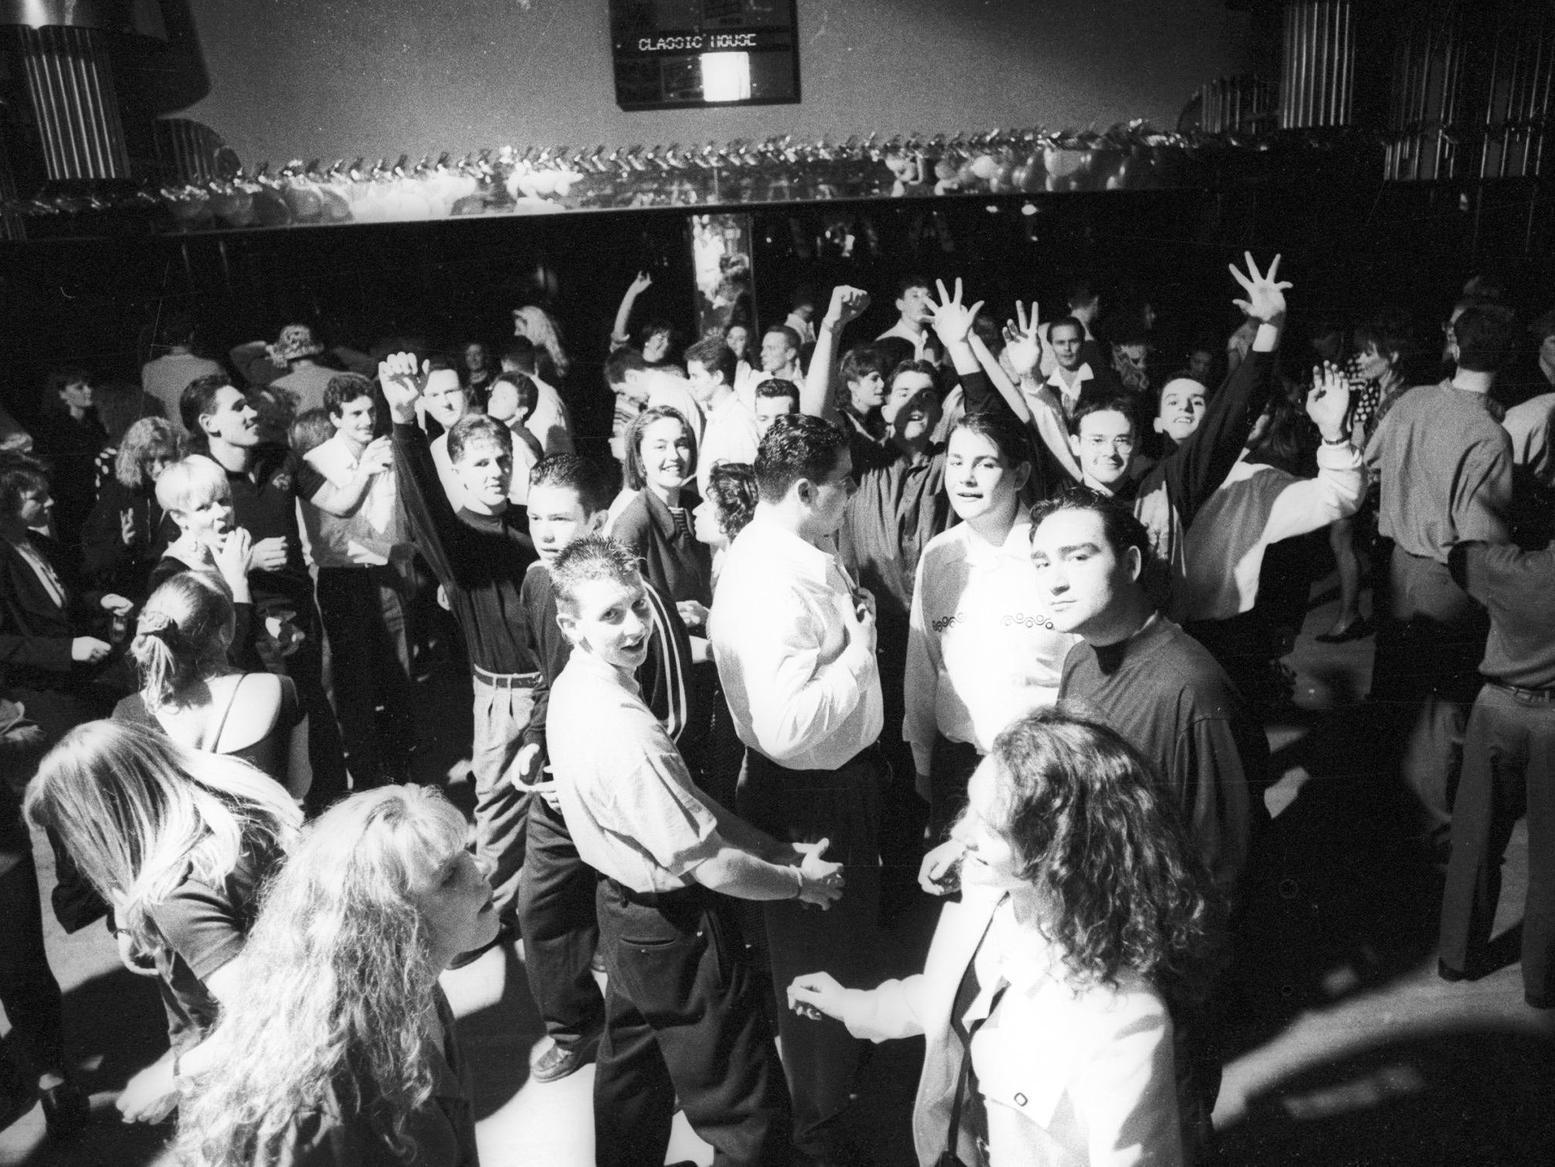 Do you know which Leeds nightclubs these photos were taken in?